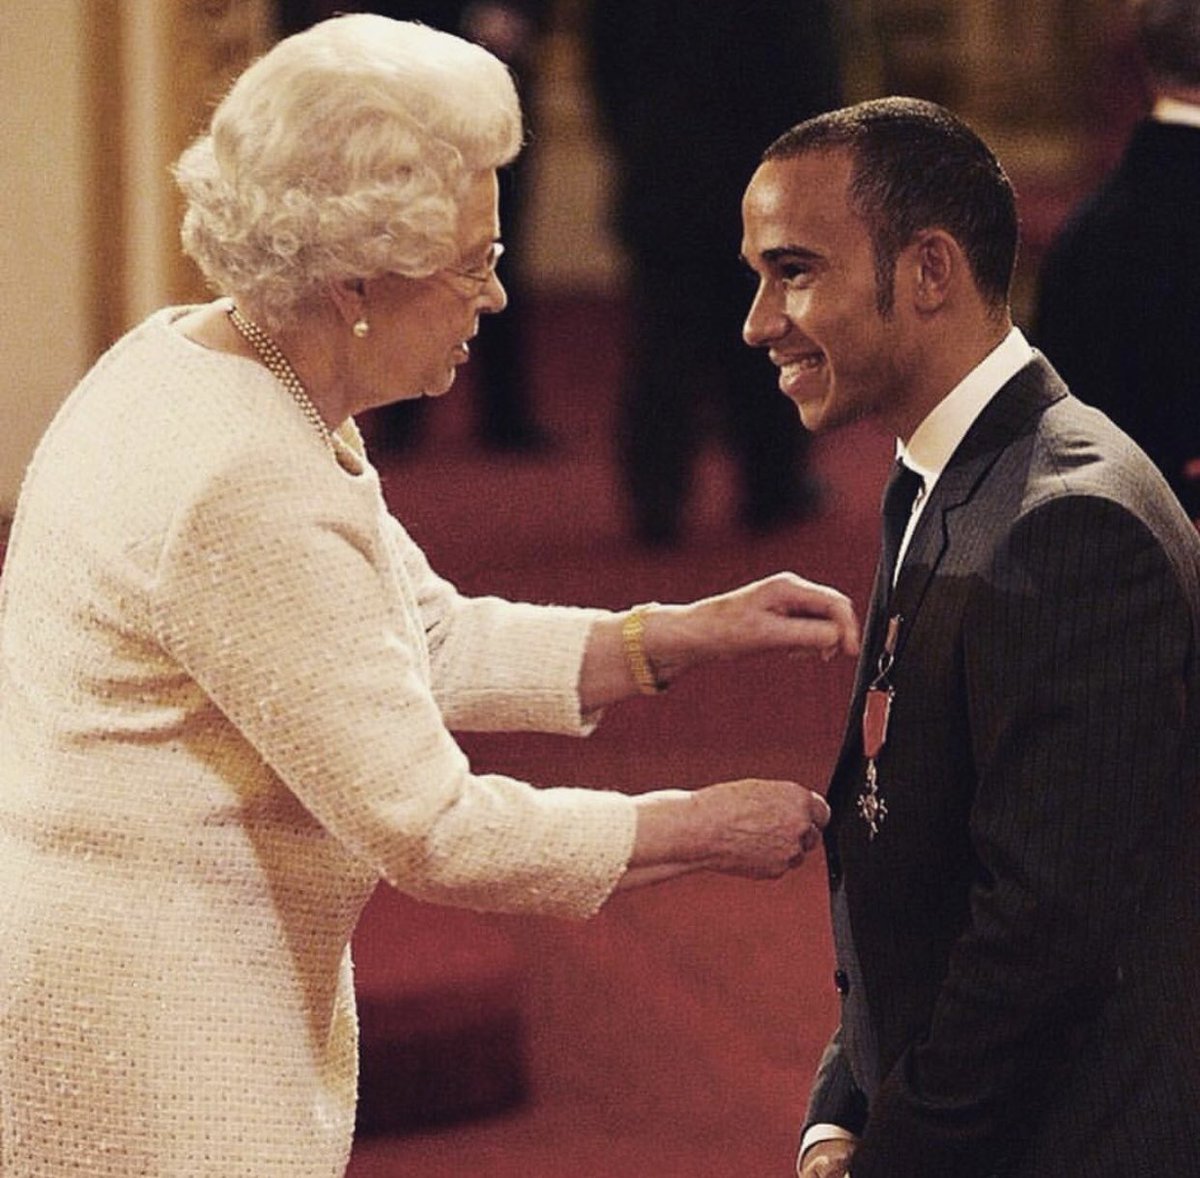 Throwback: meeting the Queen in 2008 was an honour I never thought would be possible when growing up. Just a kid from Stevenage. Anything is possible guys, anything!